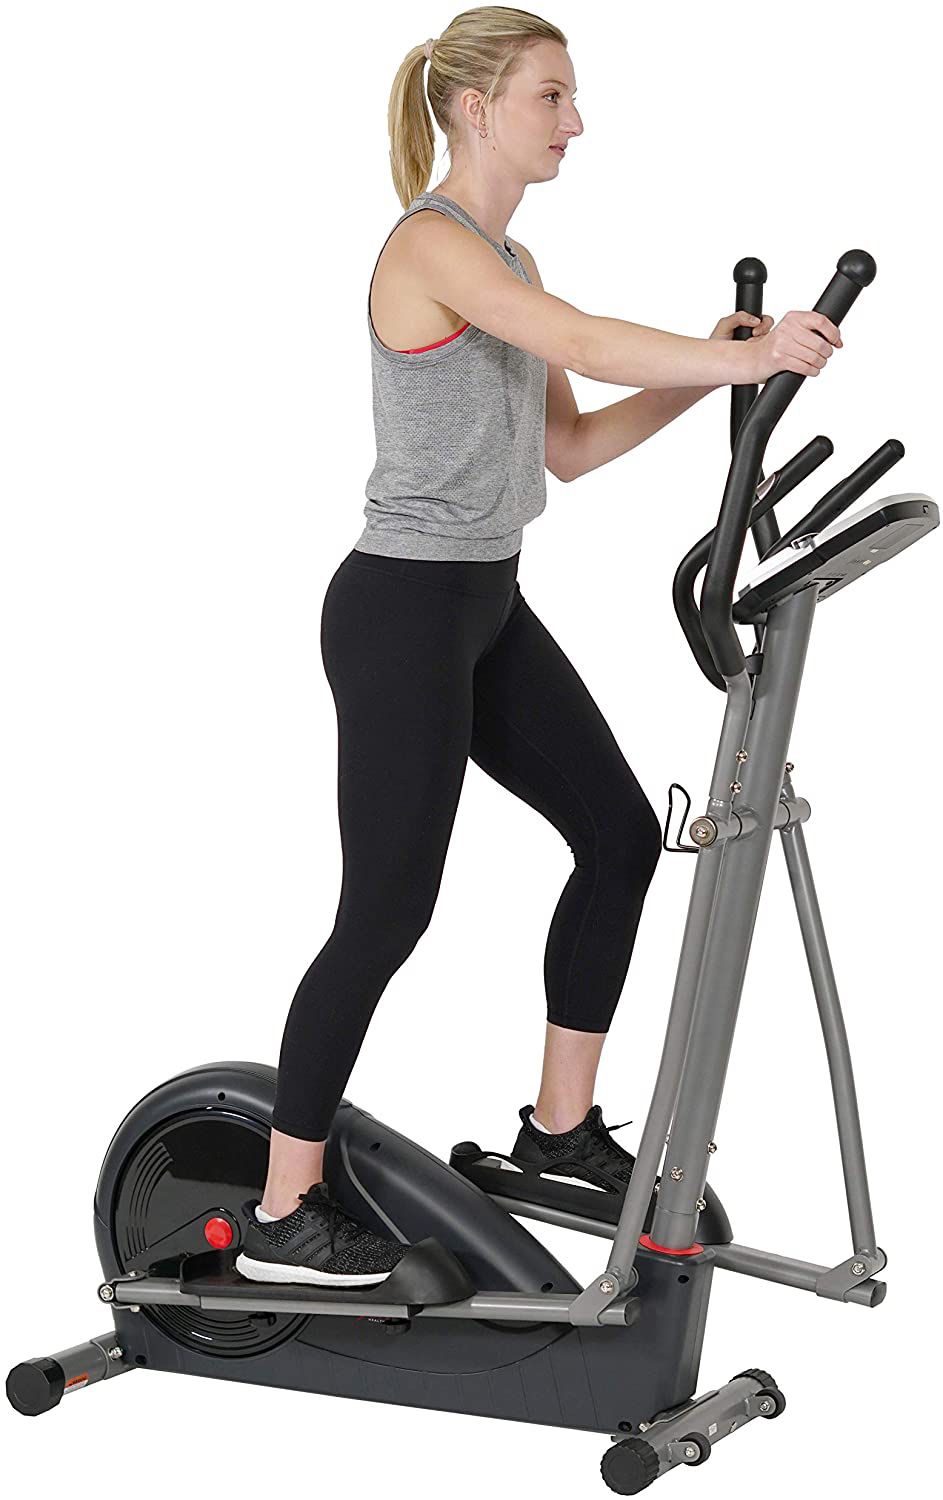 Sunny Health & Fitness Advanced Programmed Elliptical Machine Trainer with Electromagnetic Resistance